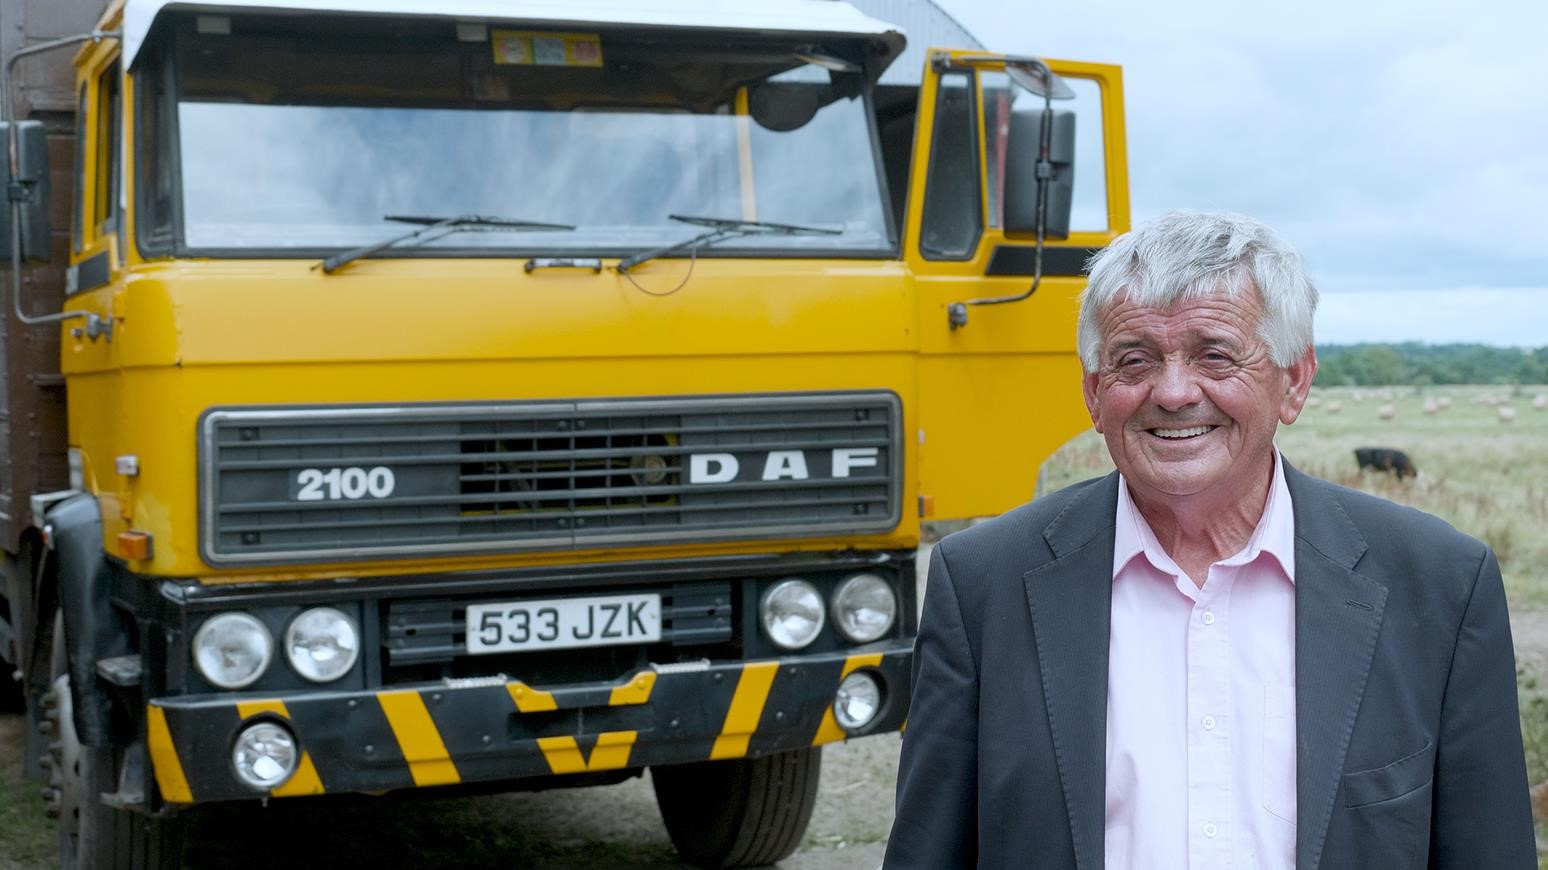 DAF Trucks Is On The Hunt For The Oldest DAF Vehicle In Operation